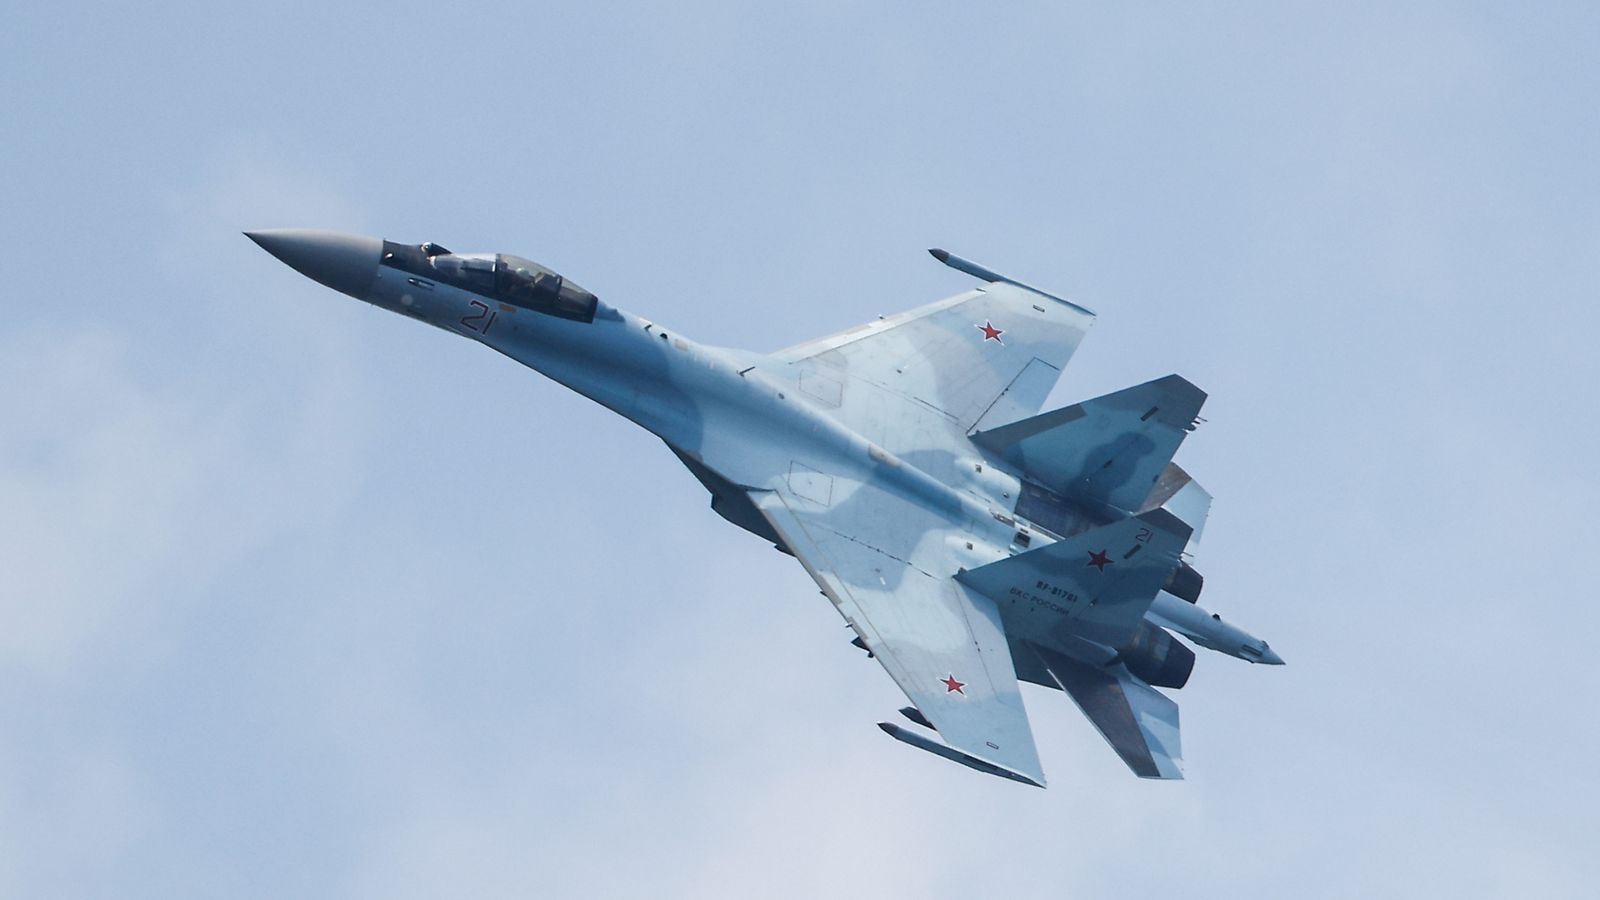 Russia says it scrambled fighter jet to intercept two US bombers over Baltic Sea